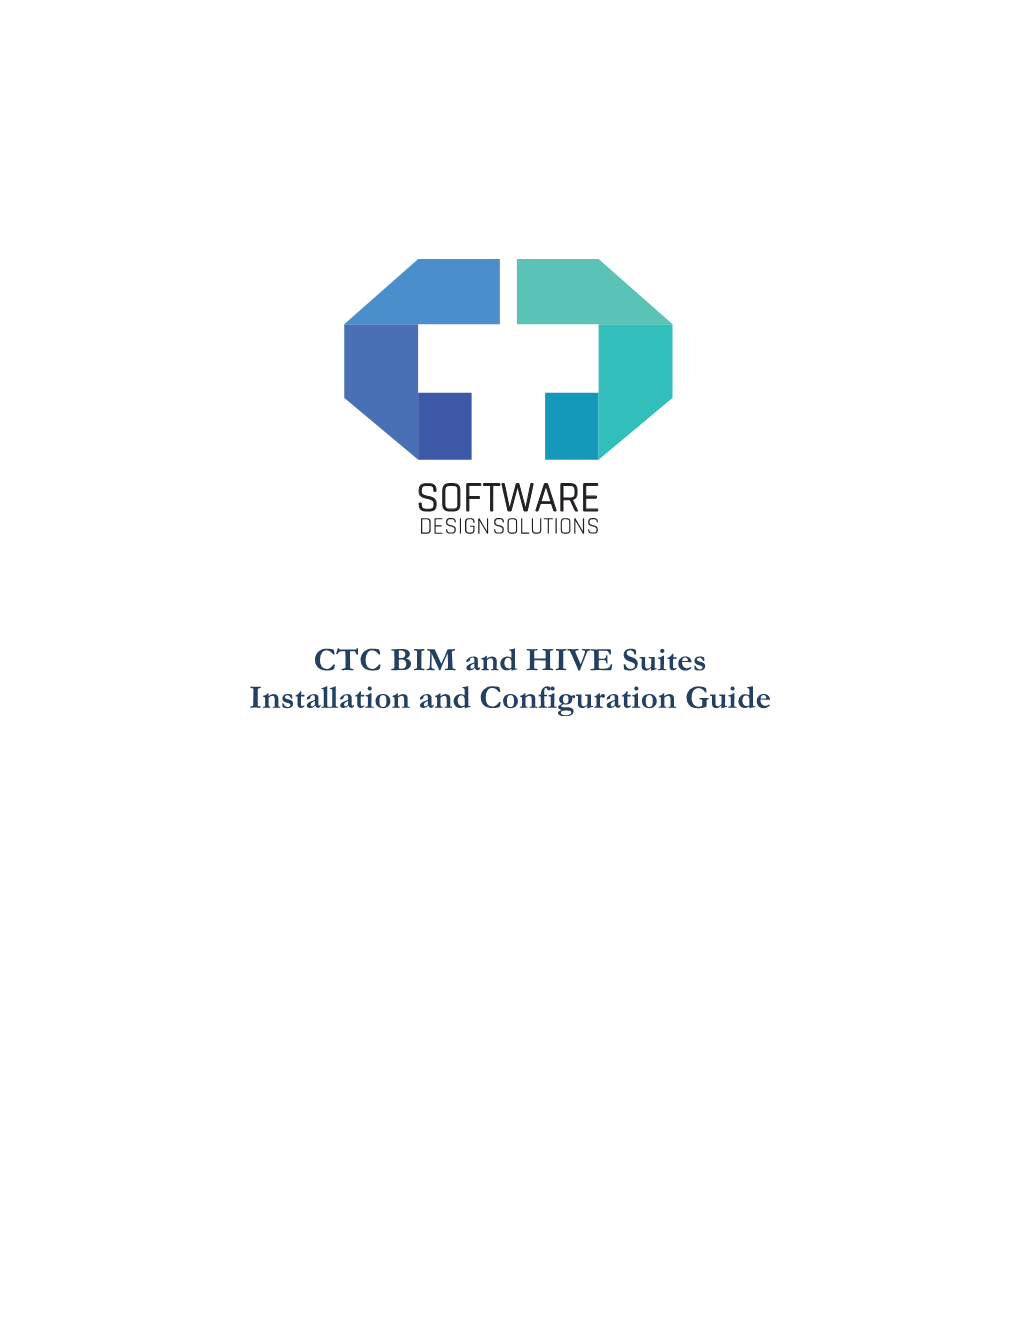 CTC BIM and HIVE Suites Installation and Configuration Guide